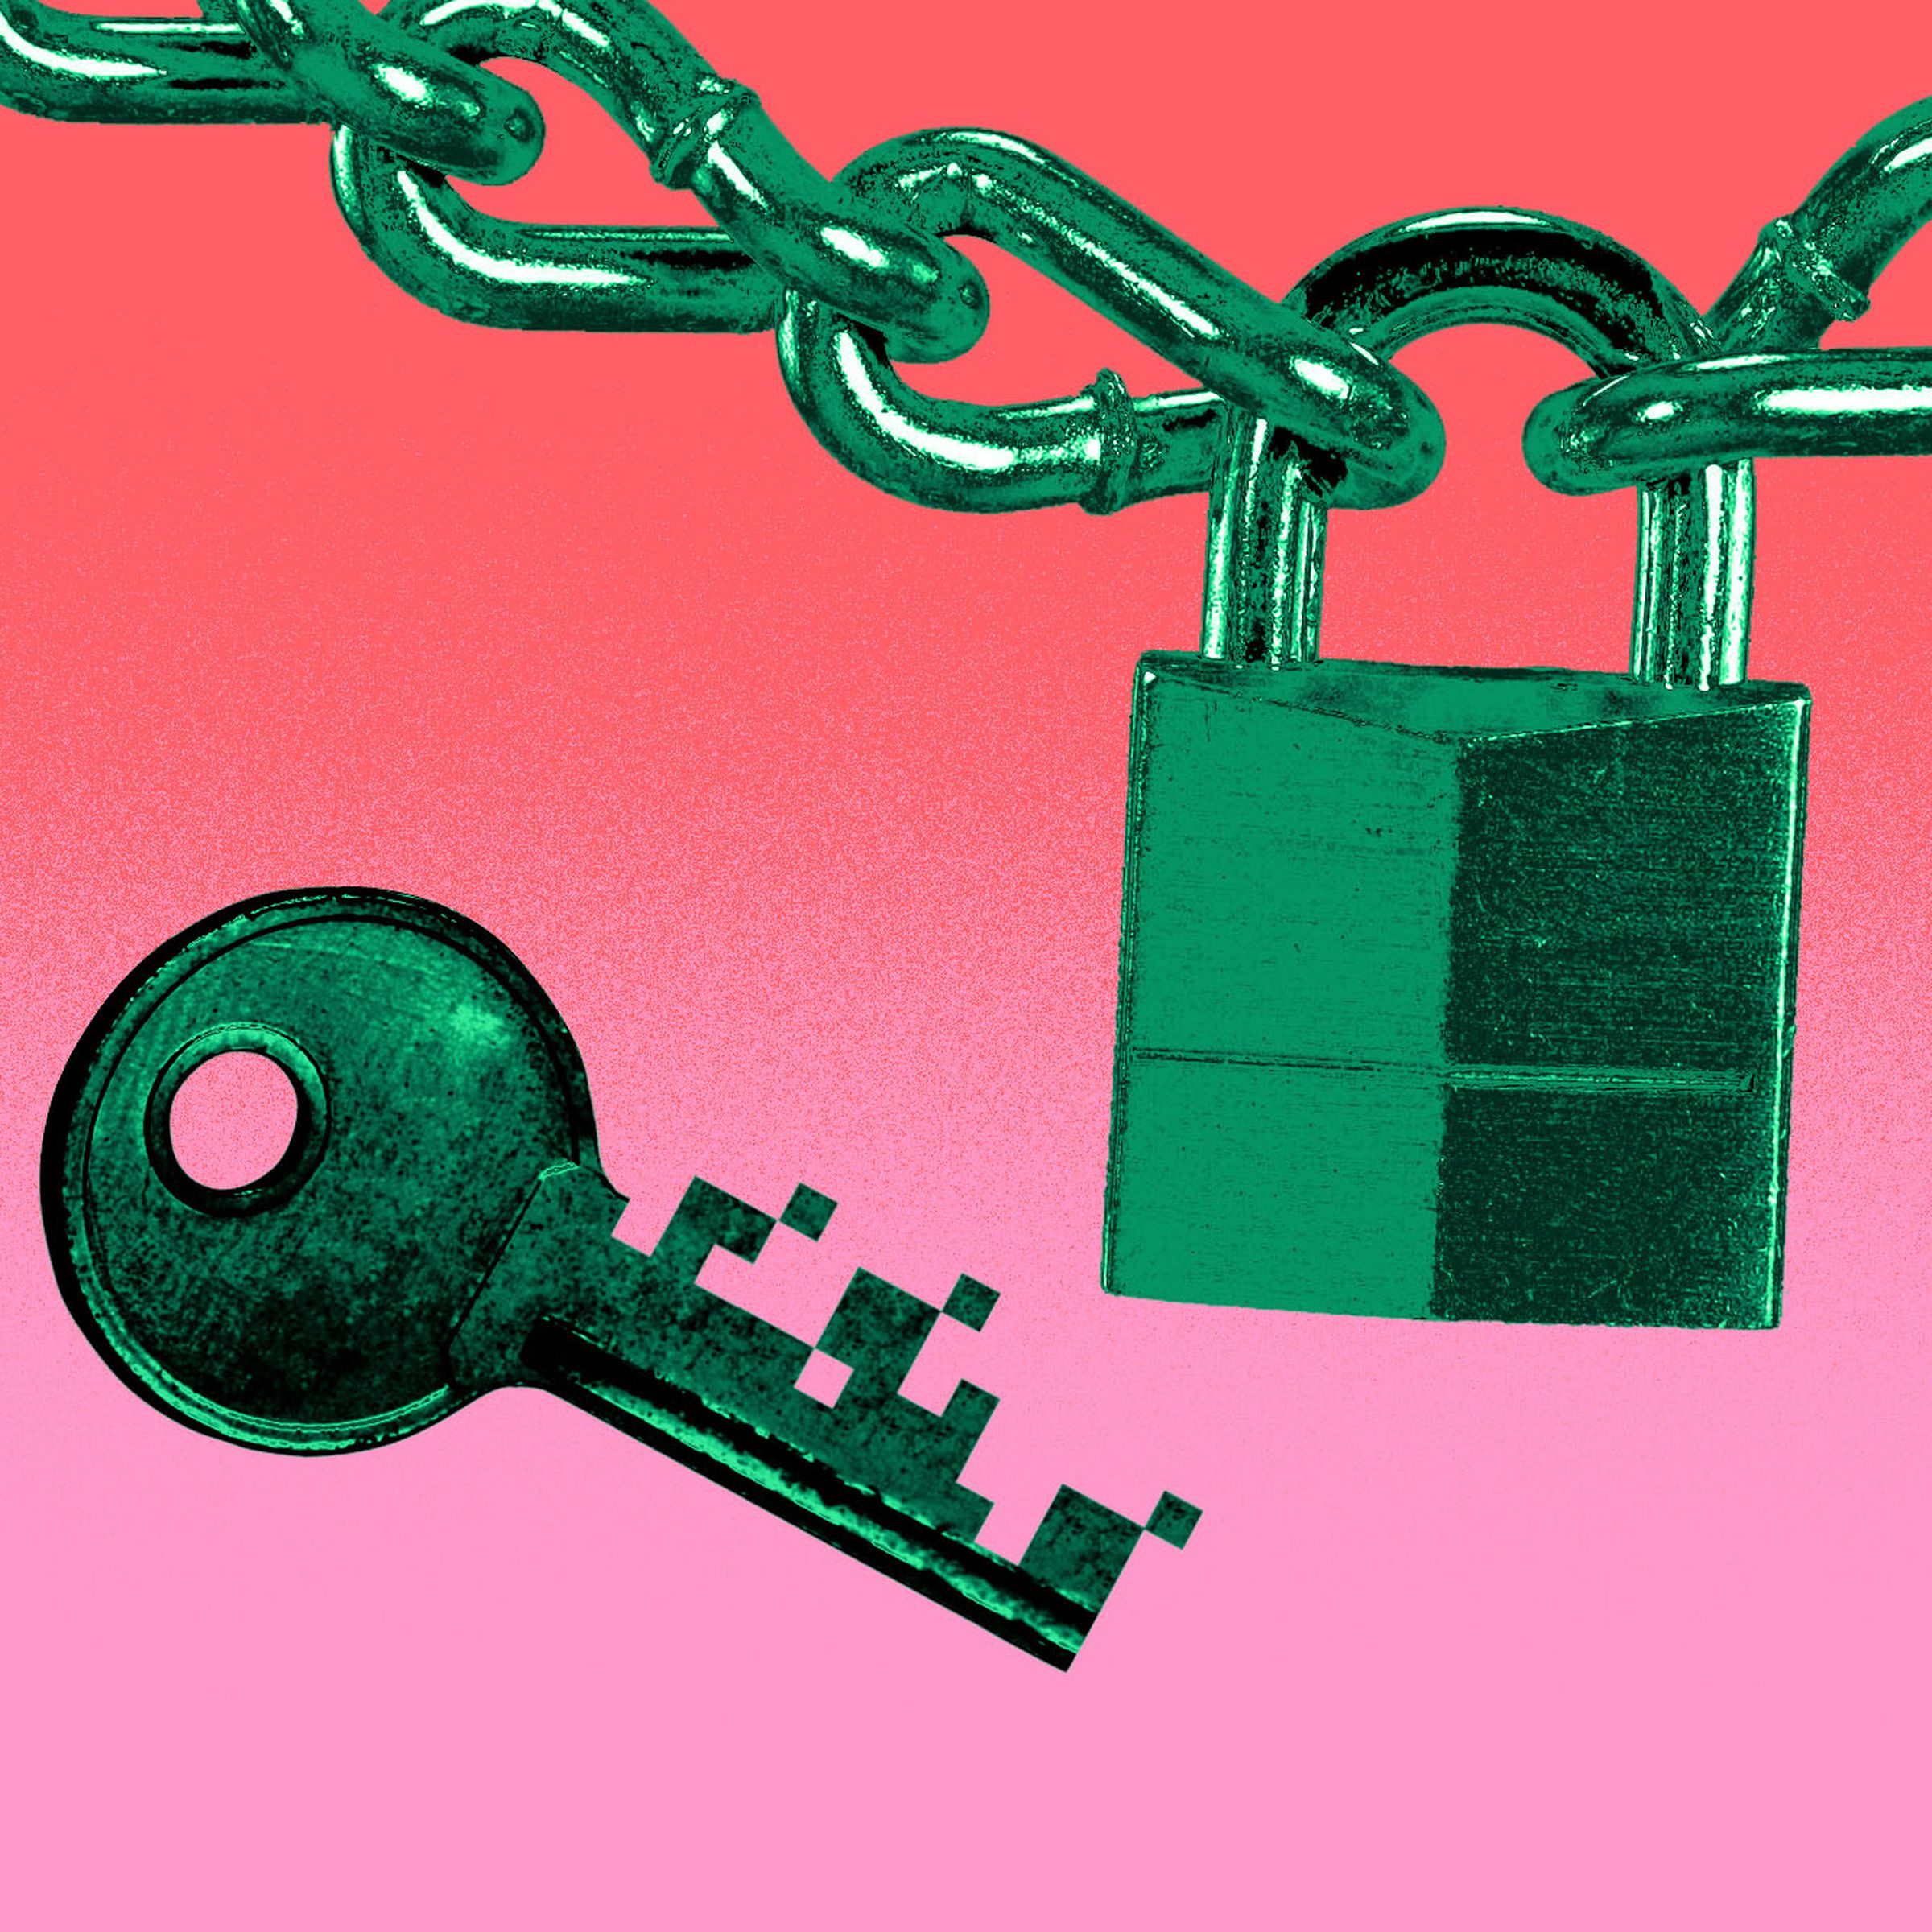 Illustration of a pixelated key next to a padlock and chain, implying online data security.